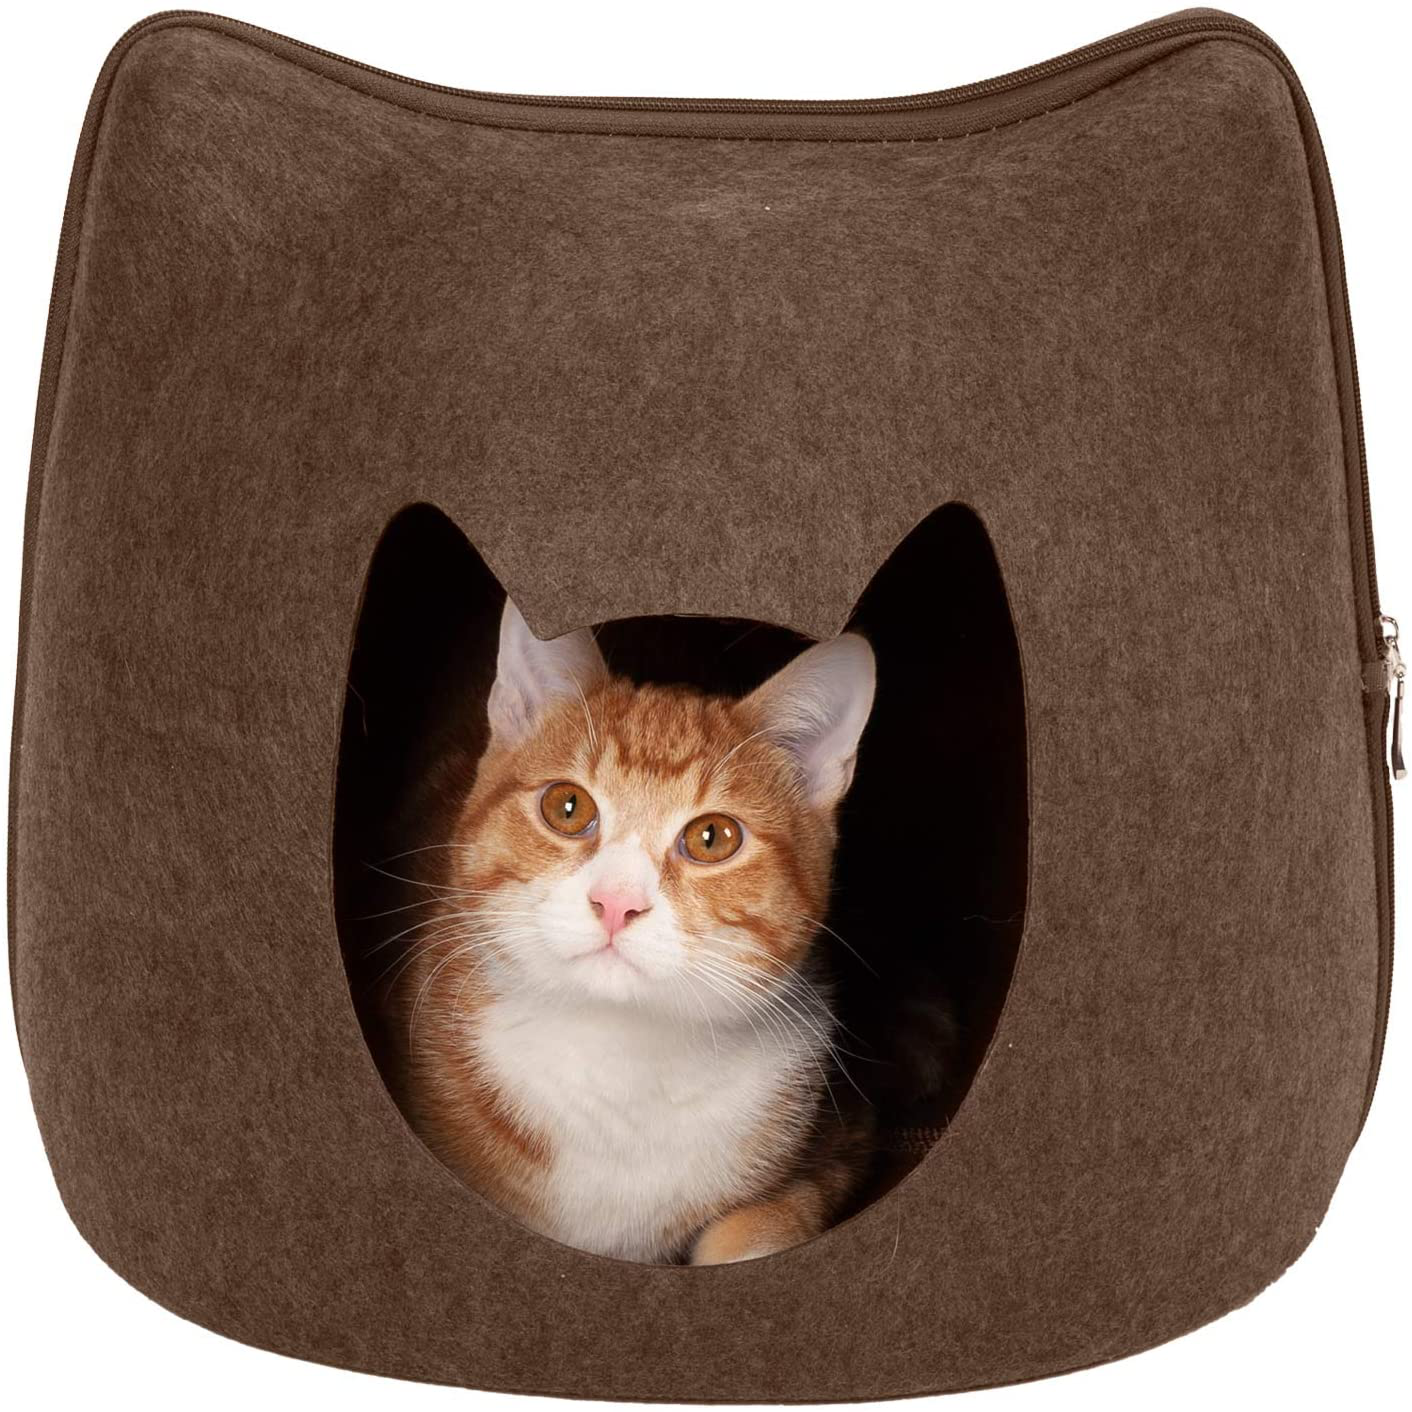 Furhaven Pet House for Cats, Kittens, and Small Dogs - Ottoman Footstool Dog House and Storage, Felt Cubby Cat Bed House, and More Animals & Pet Supplies > Pet Supplies > Dog Supplies > Dog Houses Furhaven Pet Products, Inc. Heather Brown Pet Cubby - Cat Shape One Size